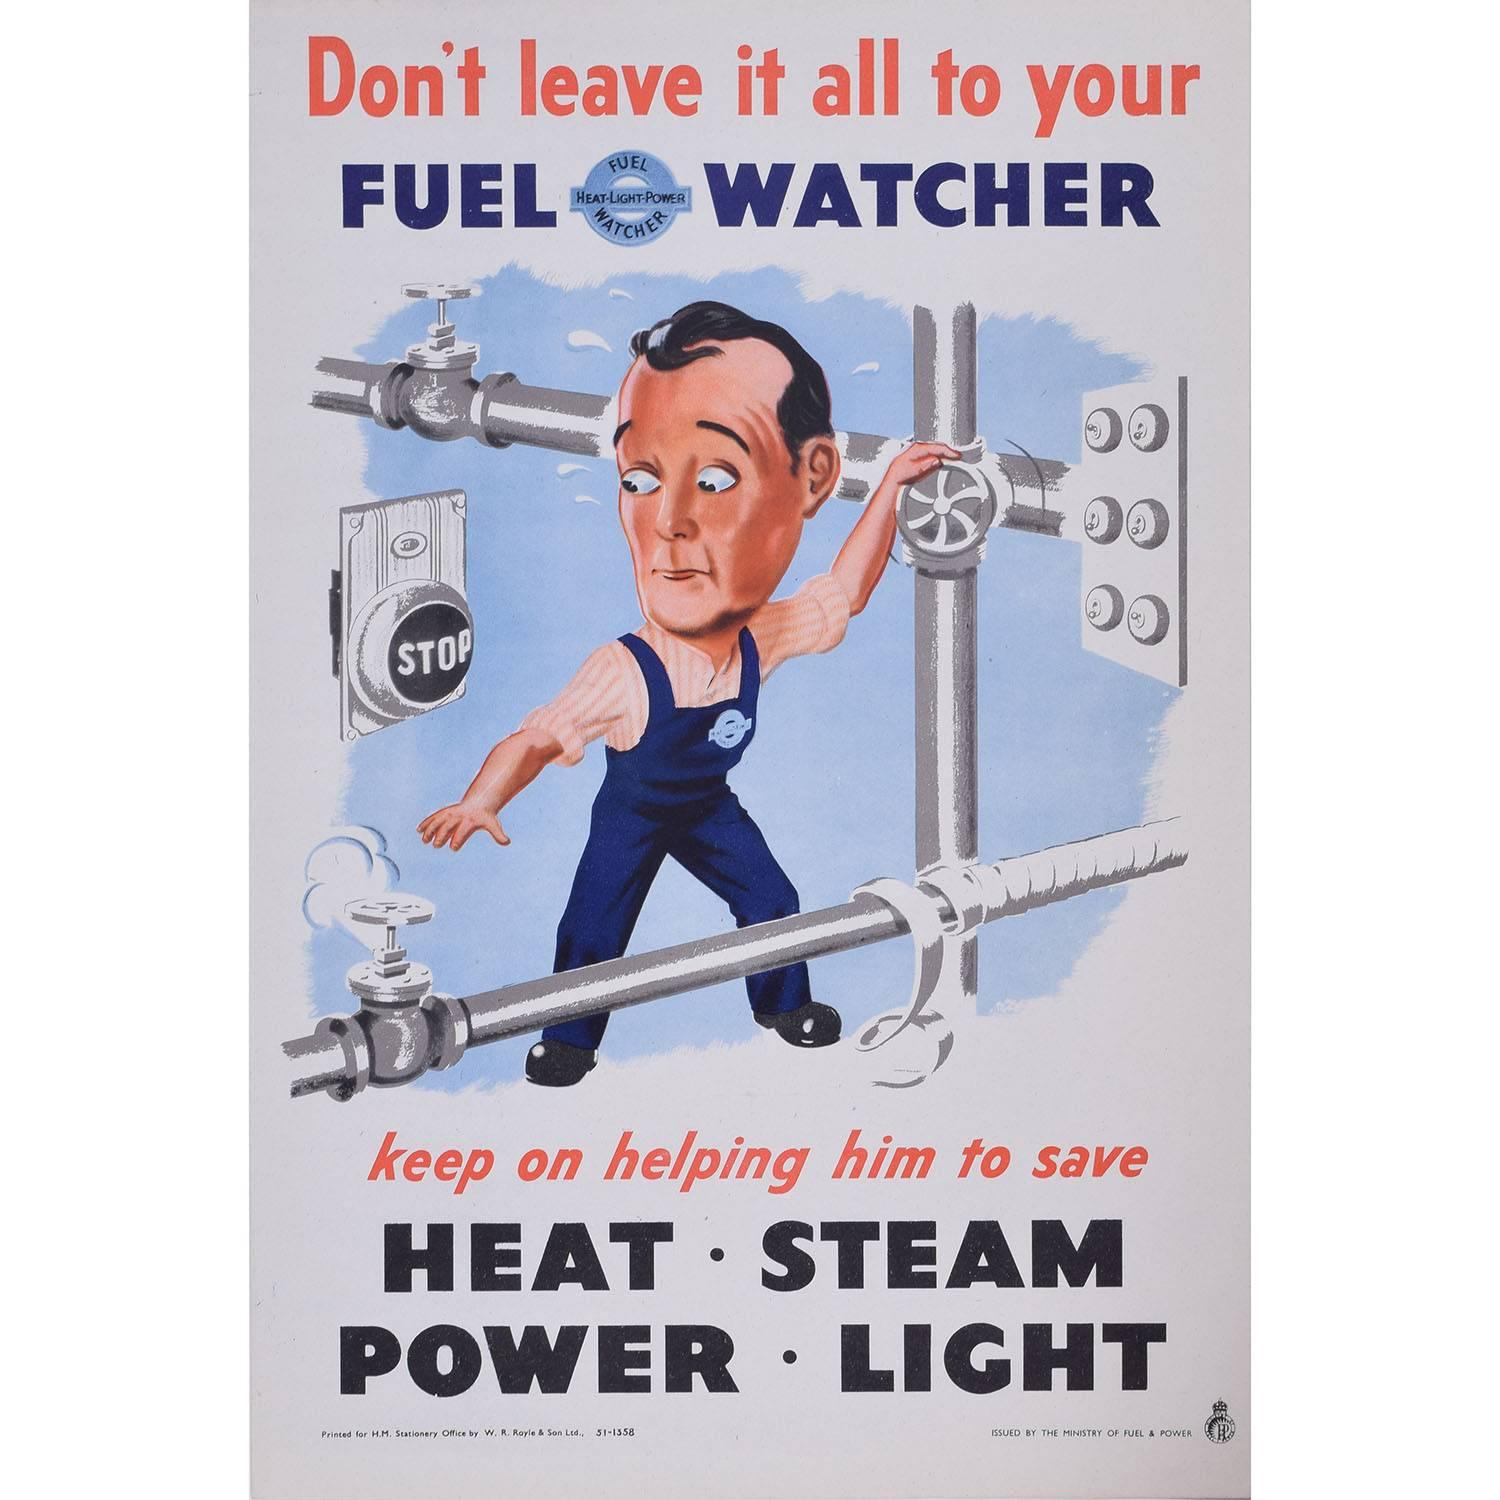 Don’t leave it all to your fuel watcher Original Vintage Poster WW2 Home Front